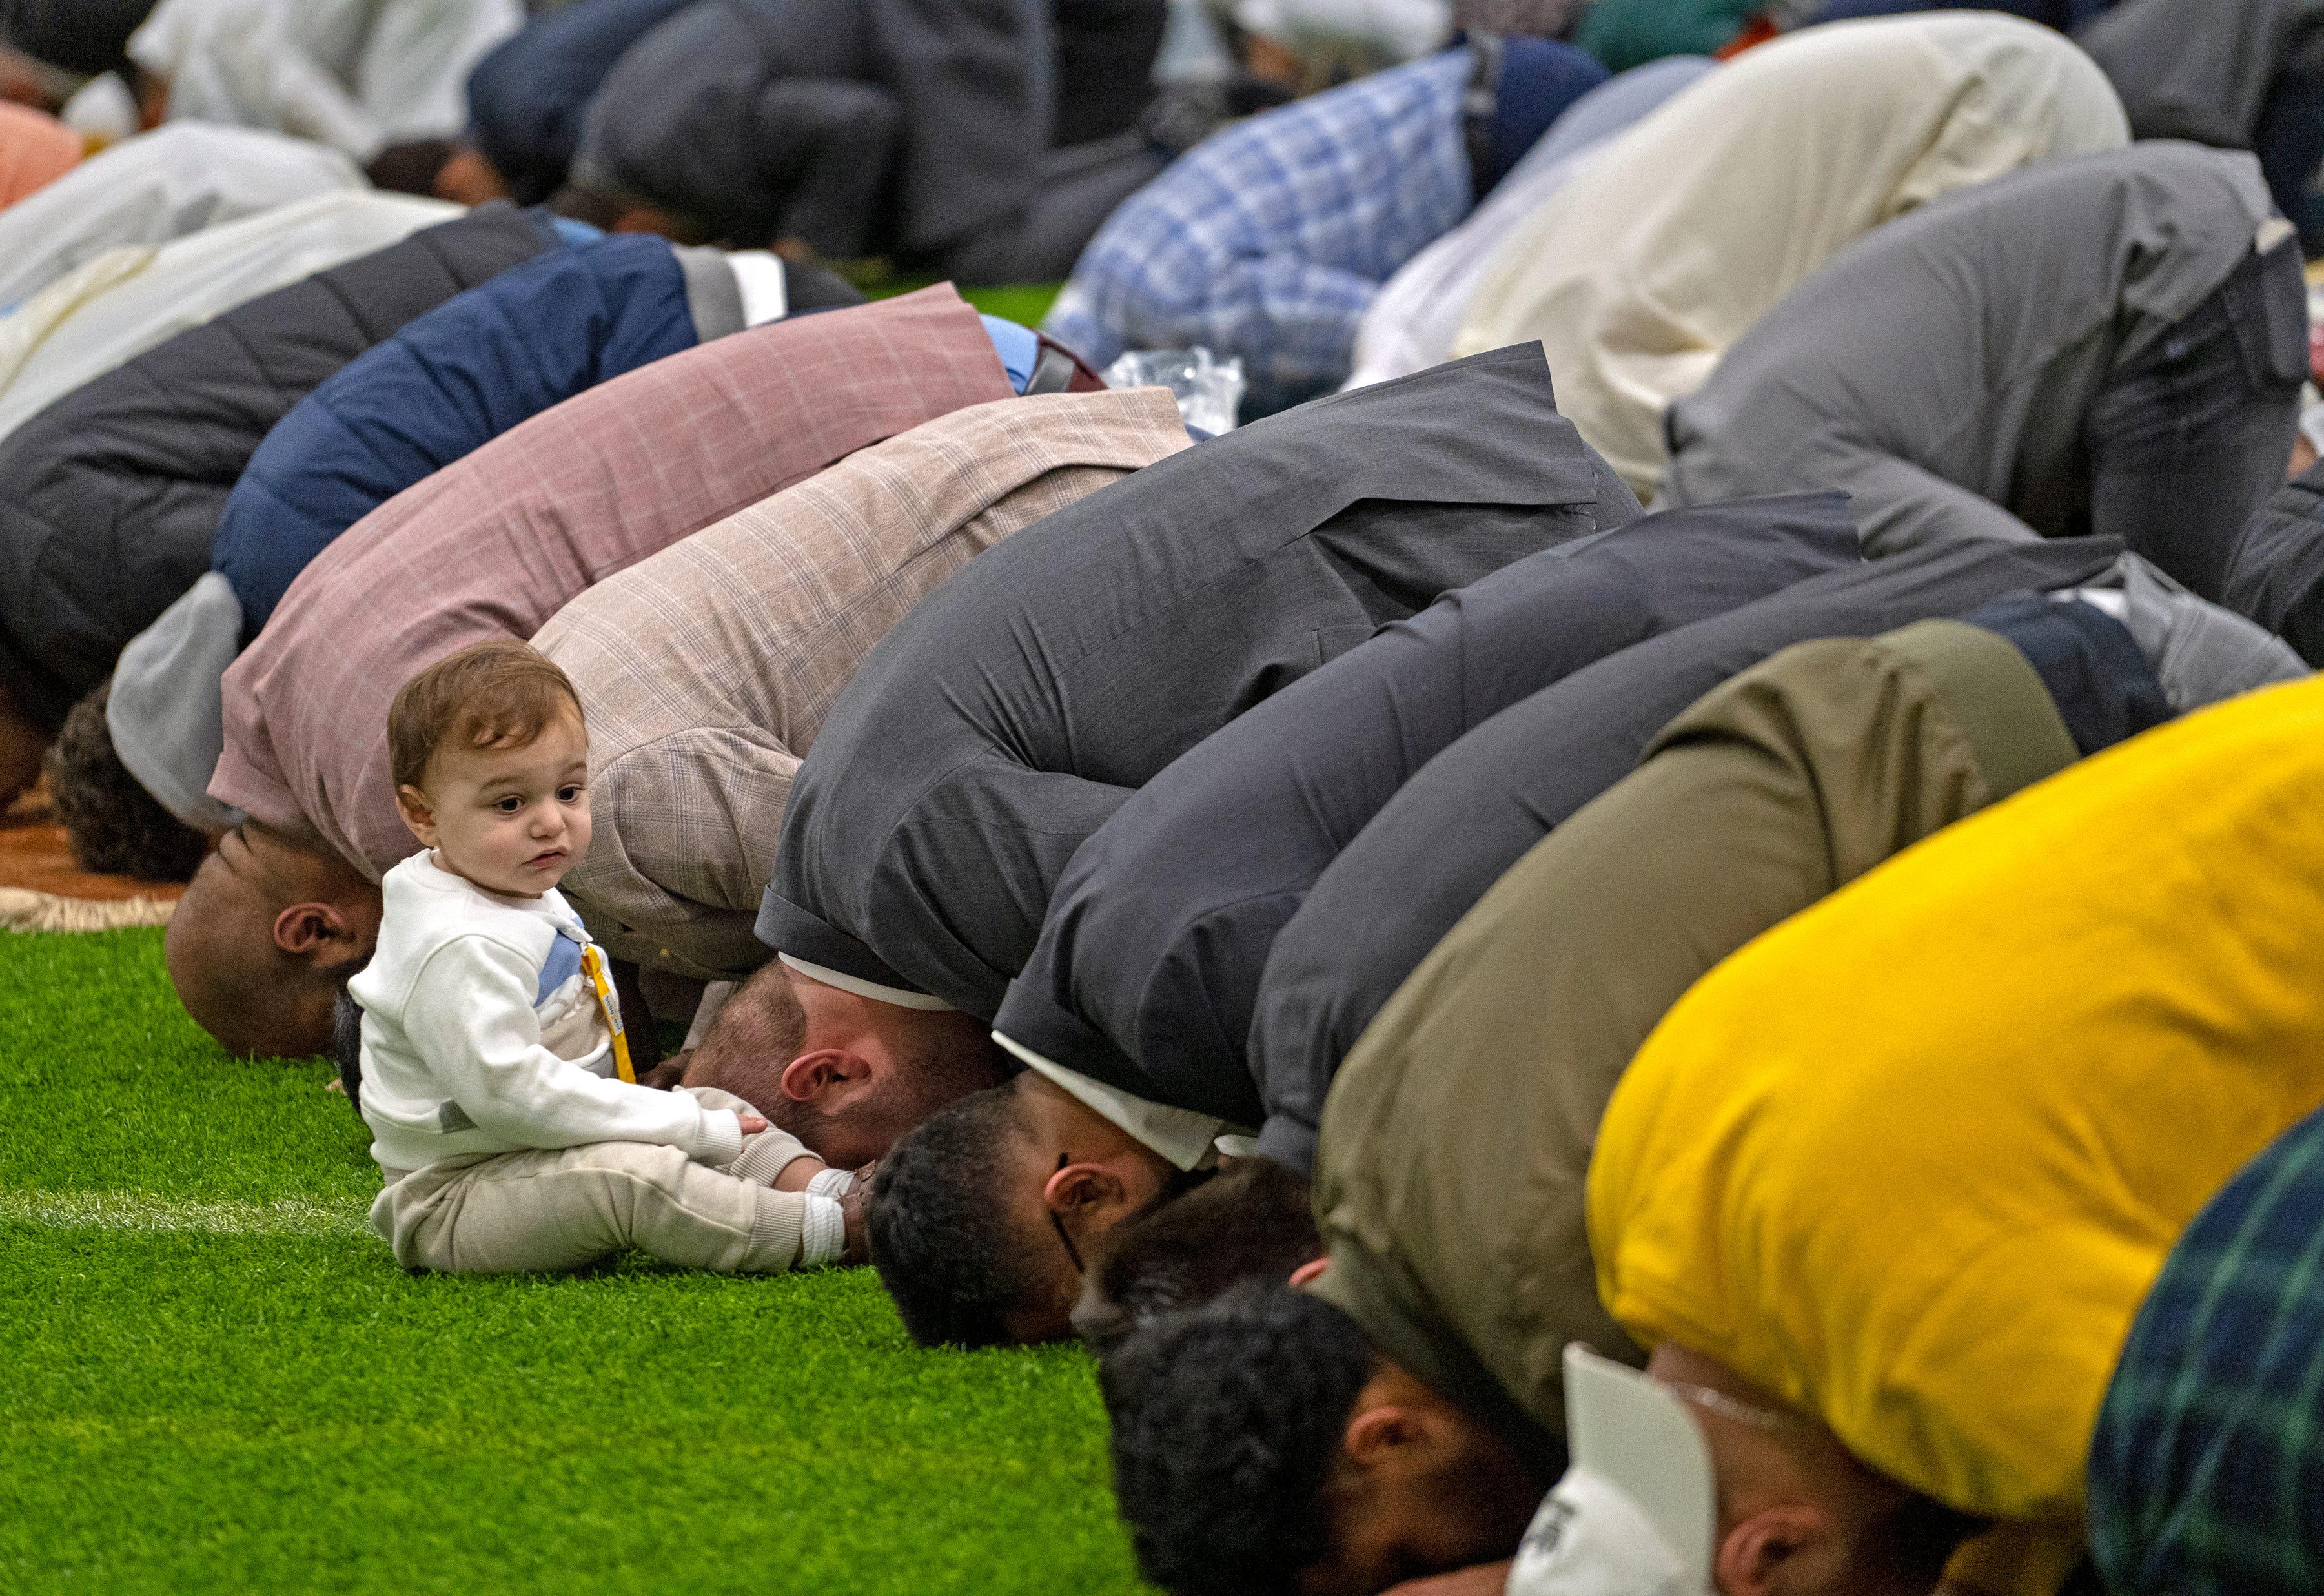 People pray to start the Eid Al-Fitr celebration Monday, May 2, 2022 at the Grand Park Sports Complex Events Center in Westfield. Prayers started the day as the Indiana Muslim community celebrated the end of the month-long dawn-to-sunset fasting of Ramadan.